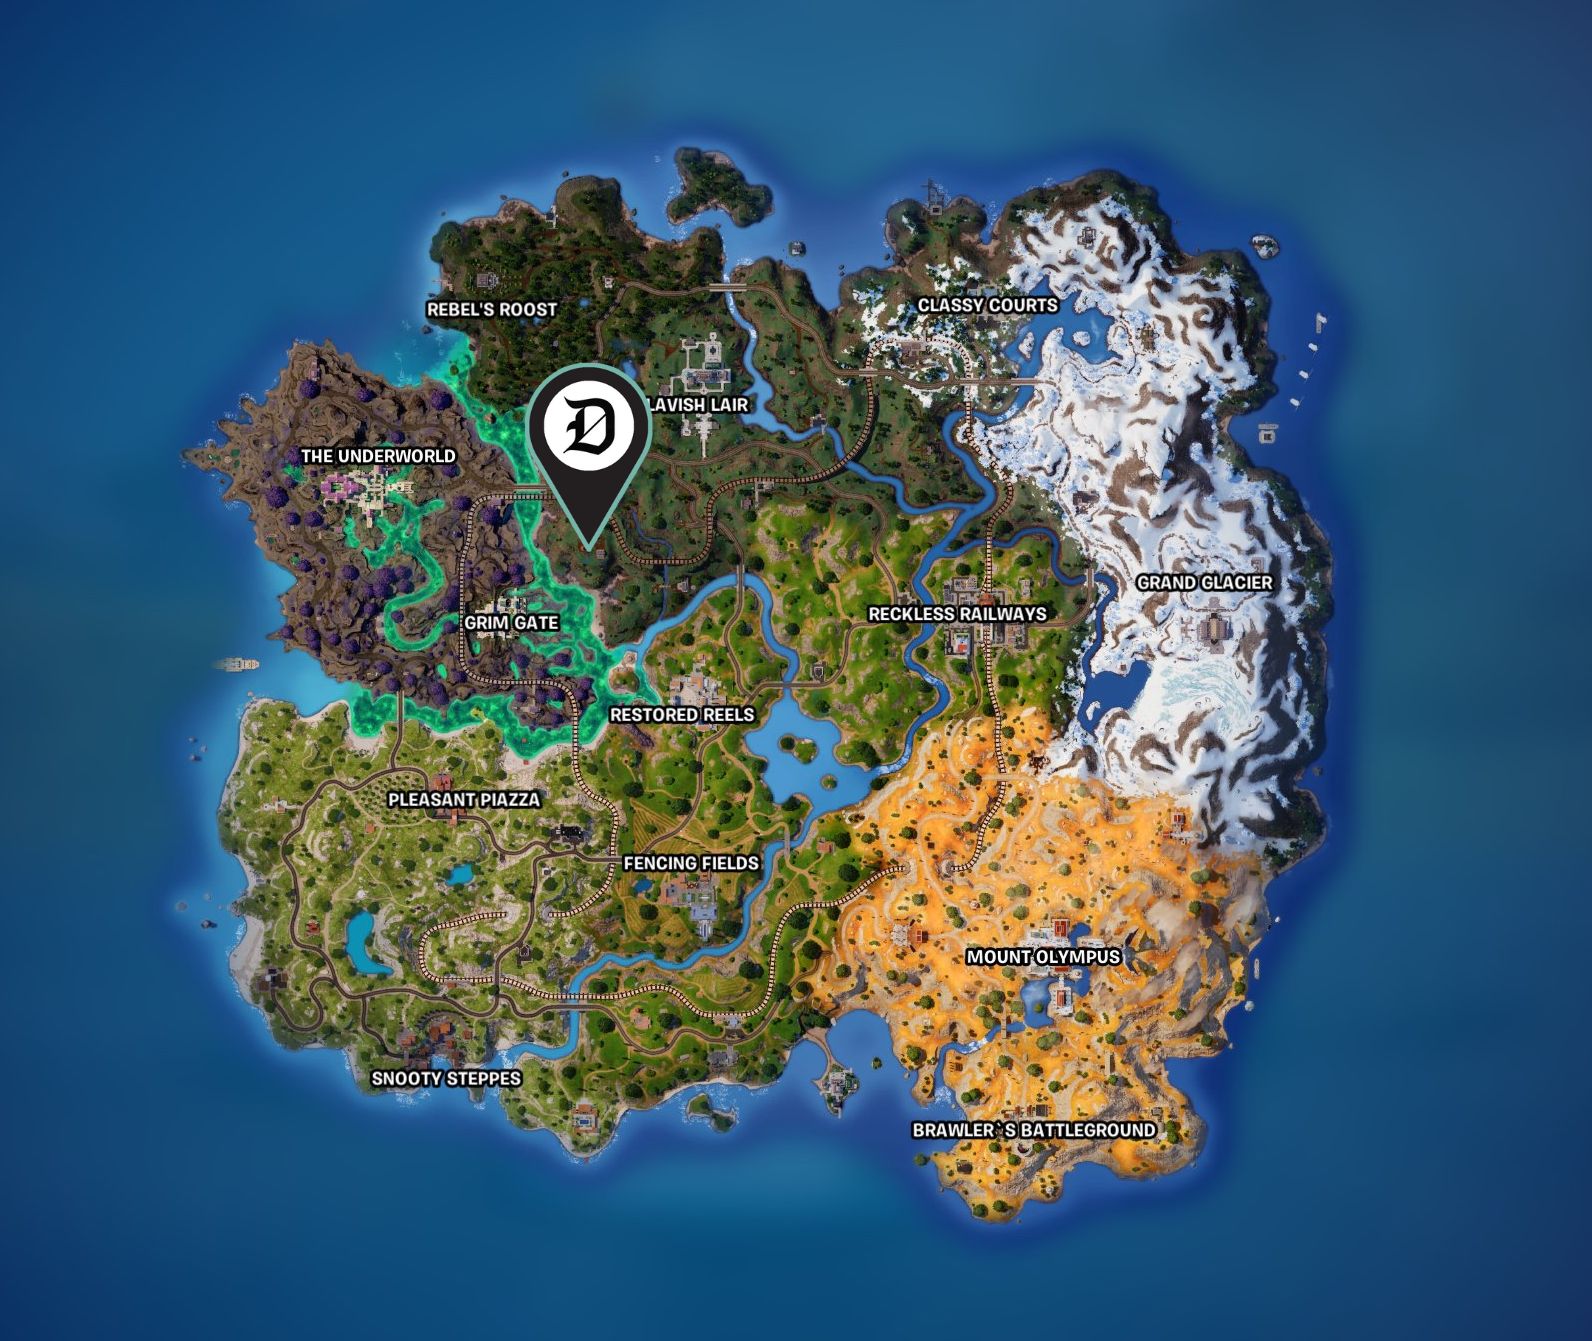 Fortnite map showing the location of Red Windmill for the quests.